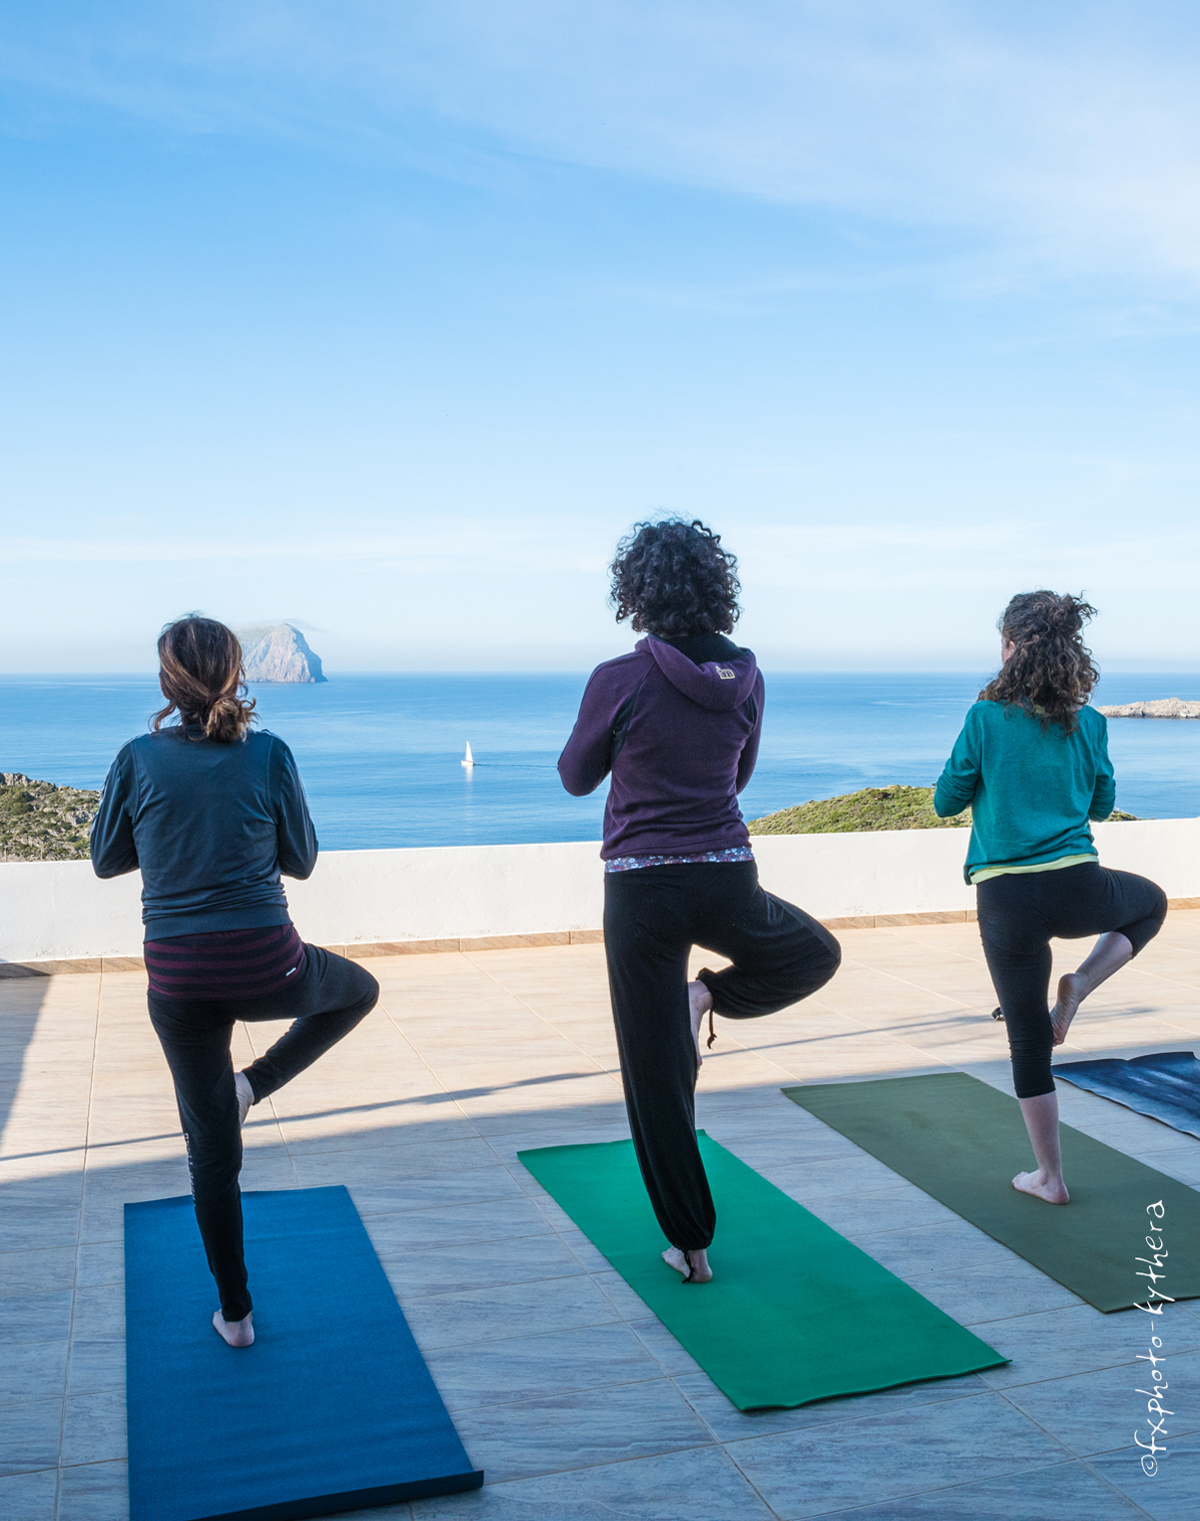 Premium Wellness Blog: Looking for the ideal destination for your next Yoga Retreat?